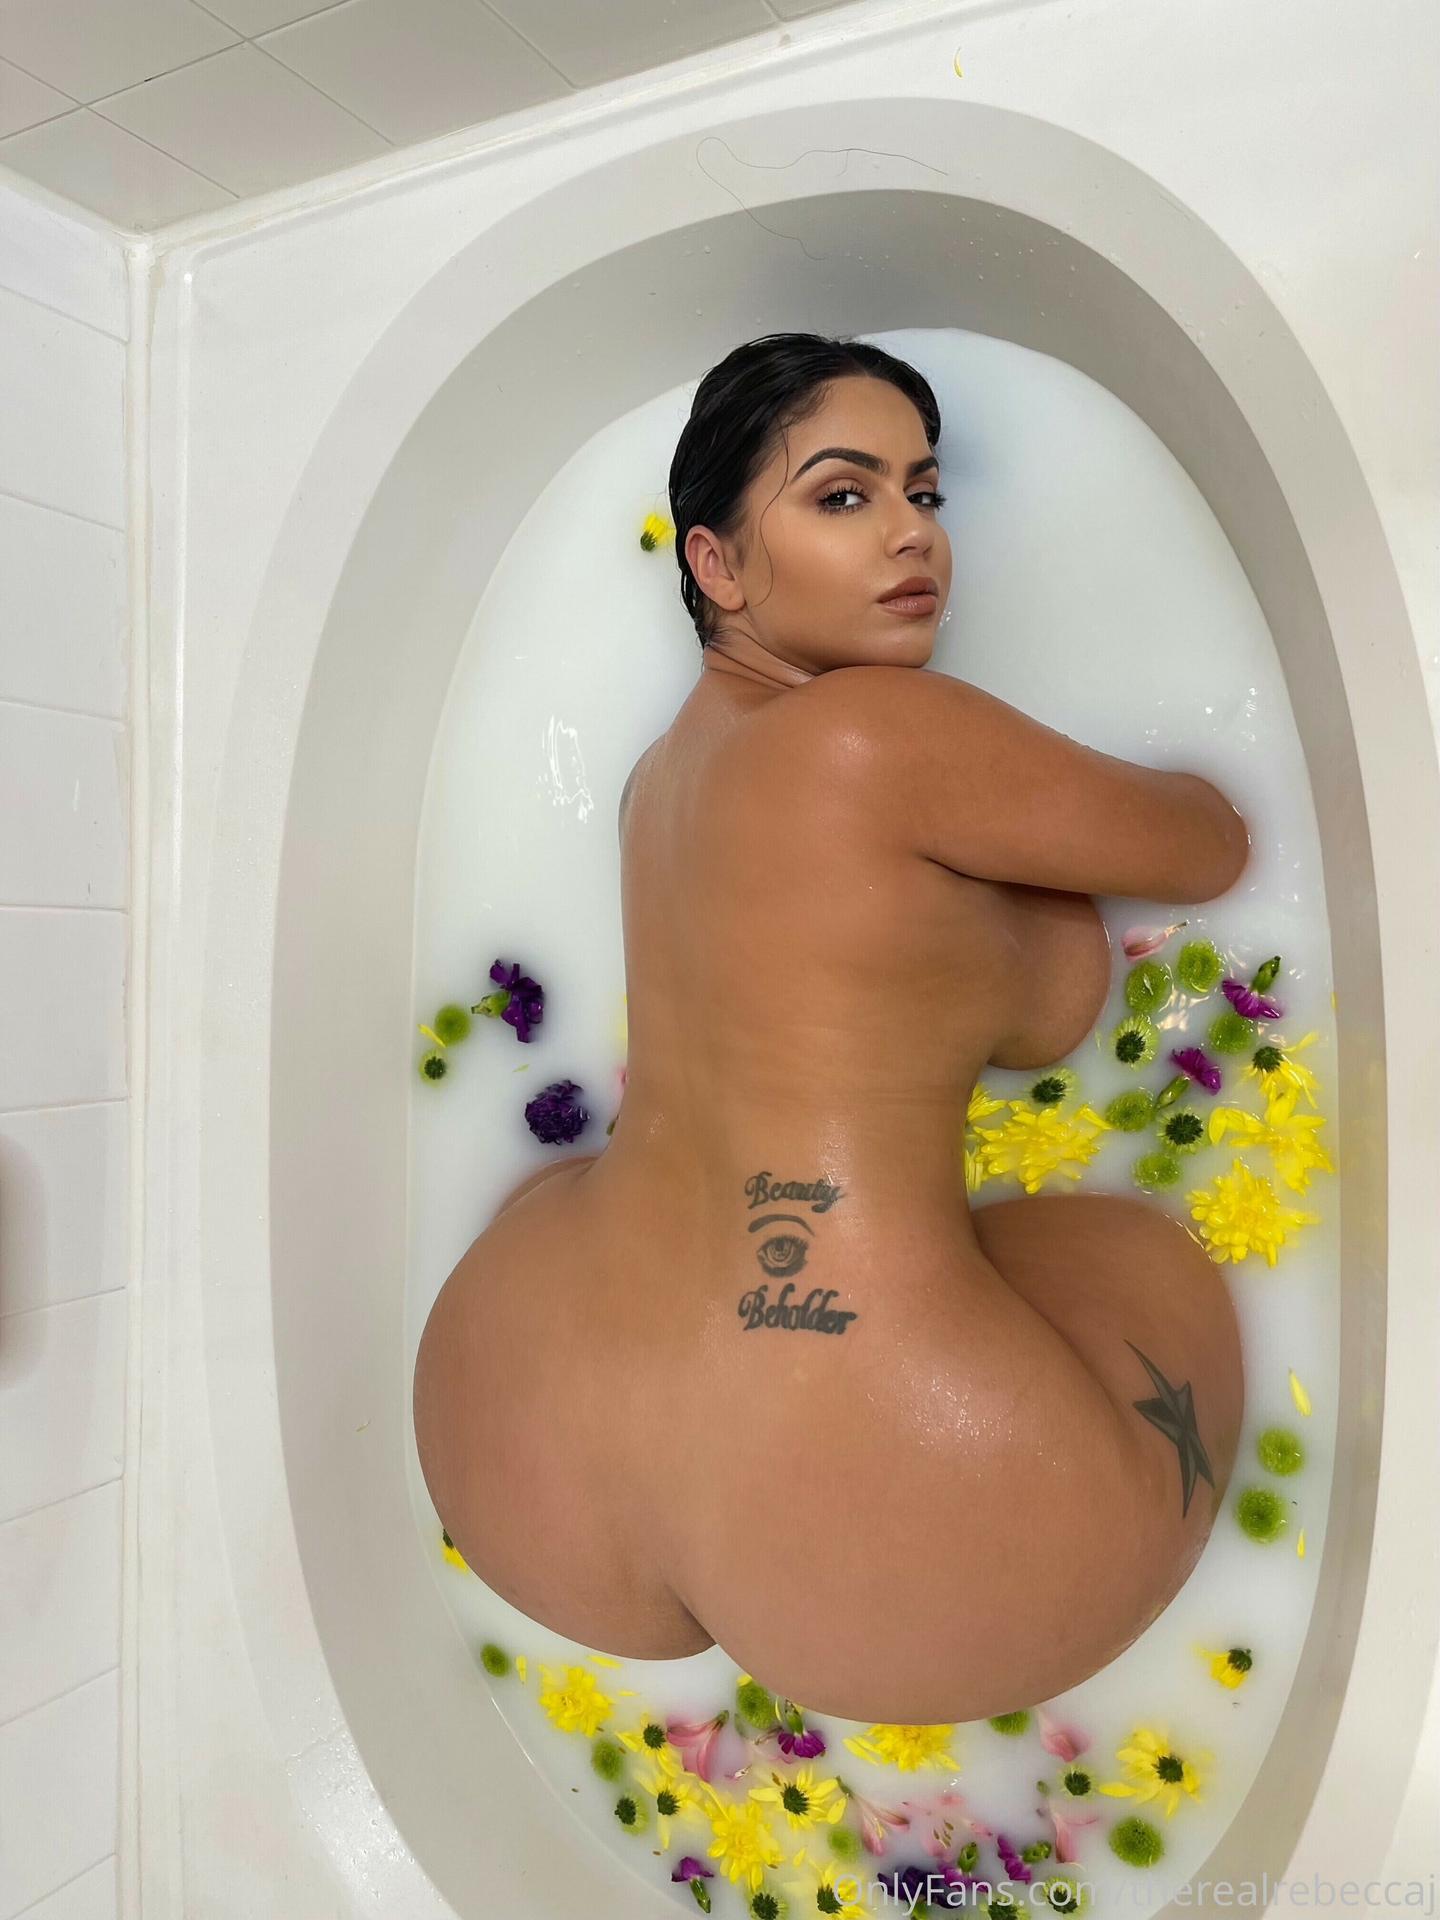 Therealrebeccaj Nude Onlyfans Leaks 36 Photos Thefappening